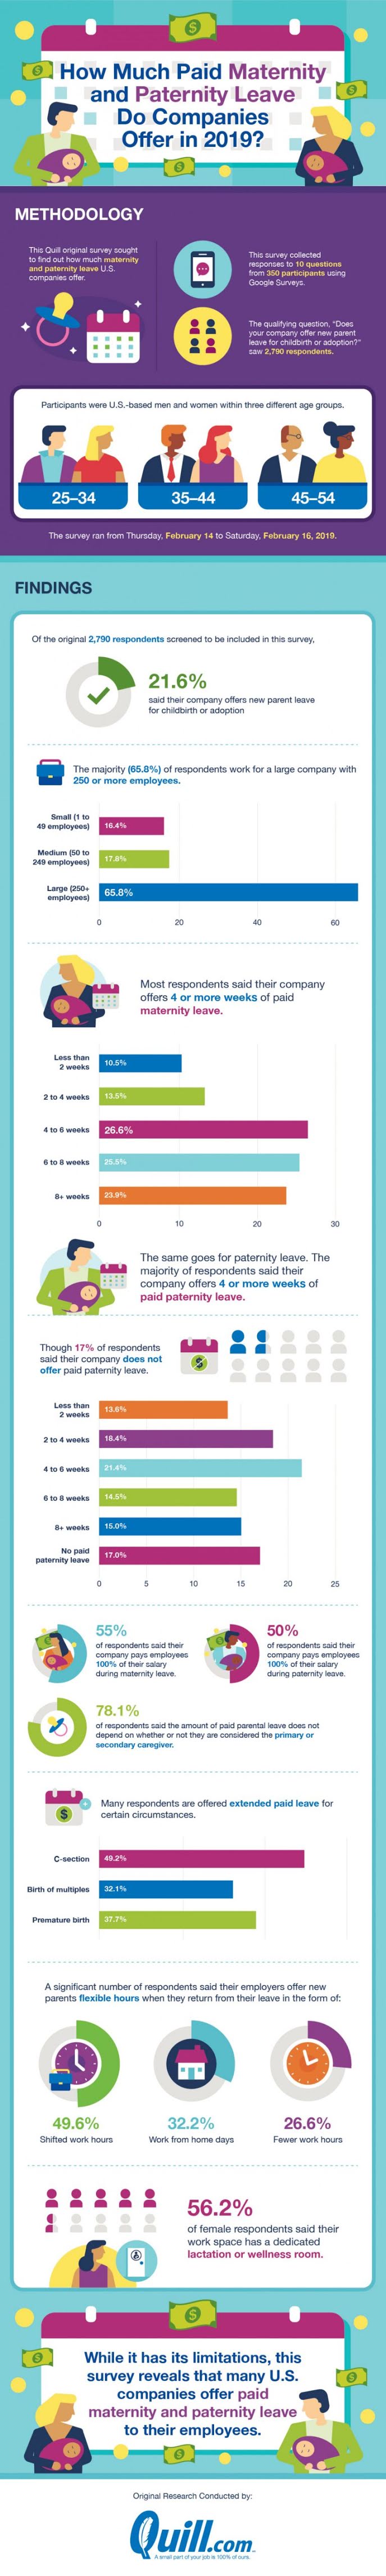 How much paid maternity and paternity leave do companies offer in 2019? #infographic